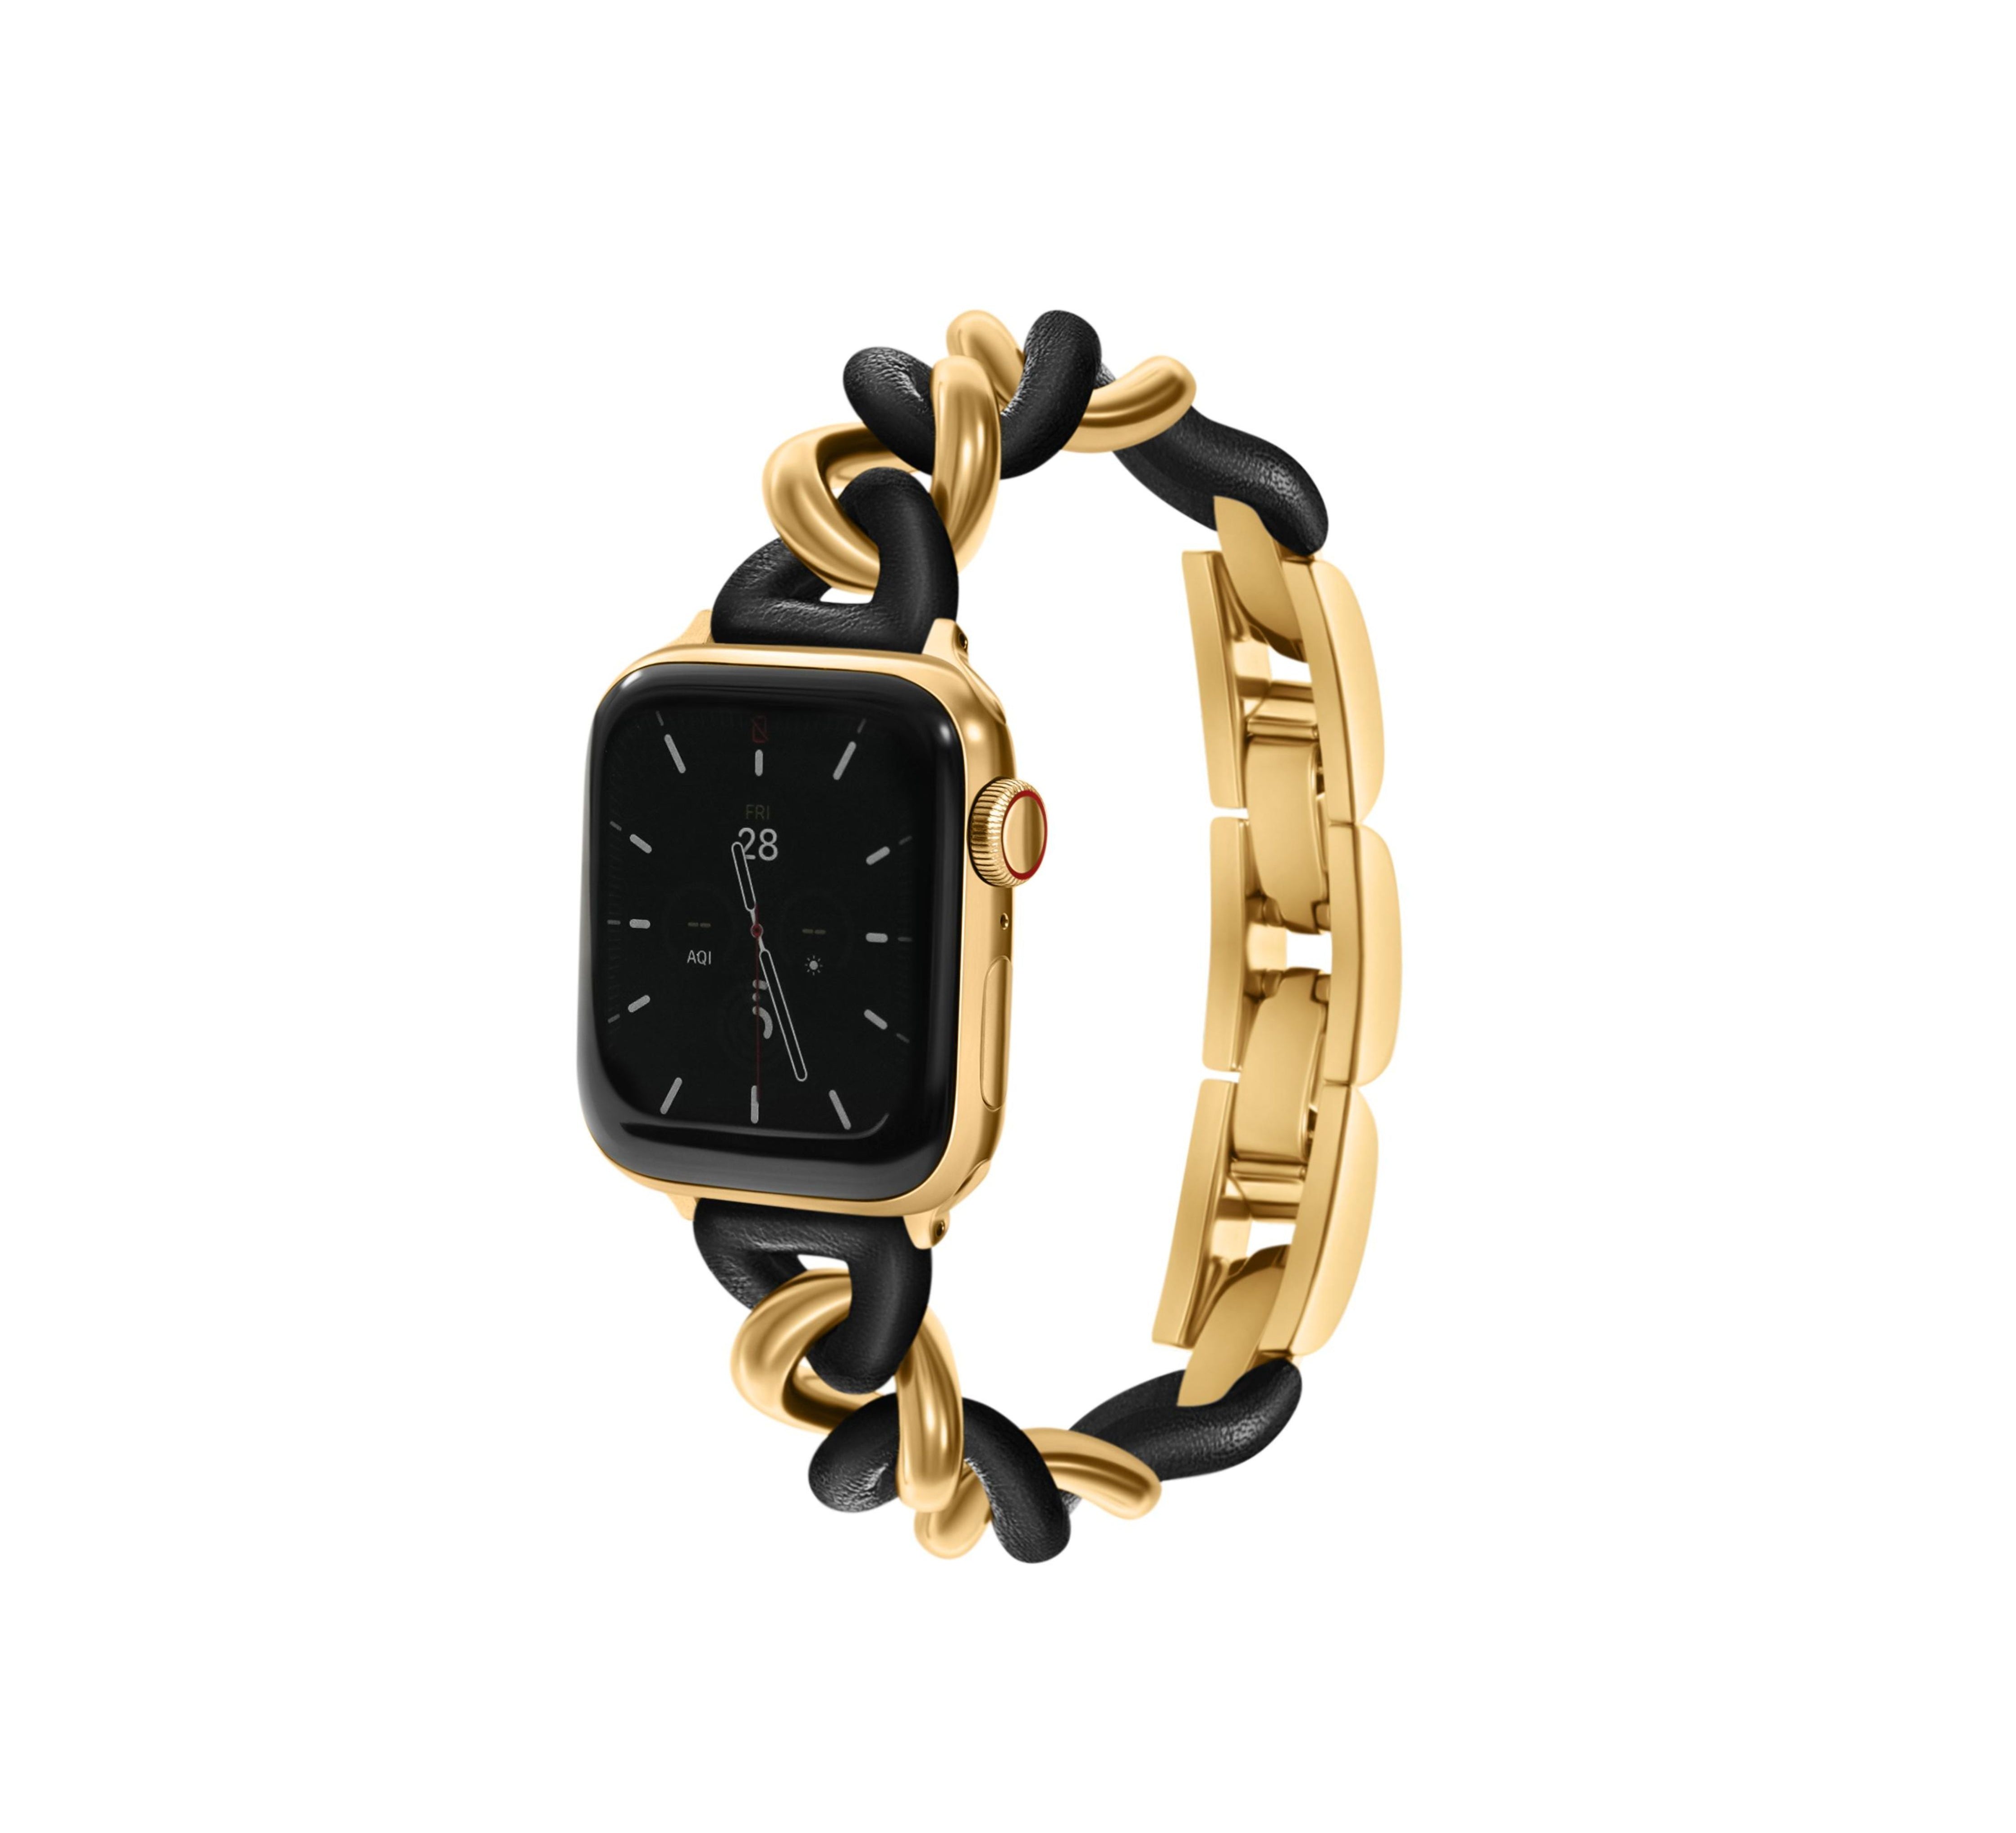 NEW! Leather Link Band for the Apple Watch - Goldenerre Women's Apple Watch Bands and Jewelry